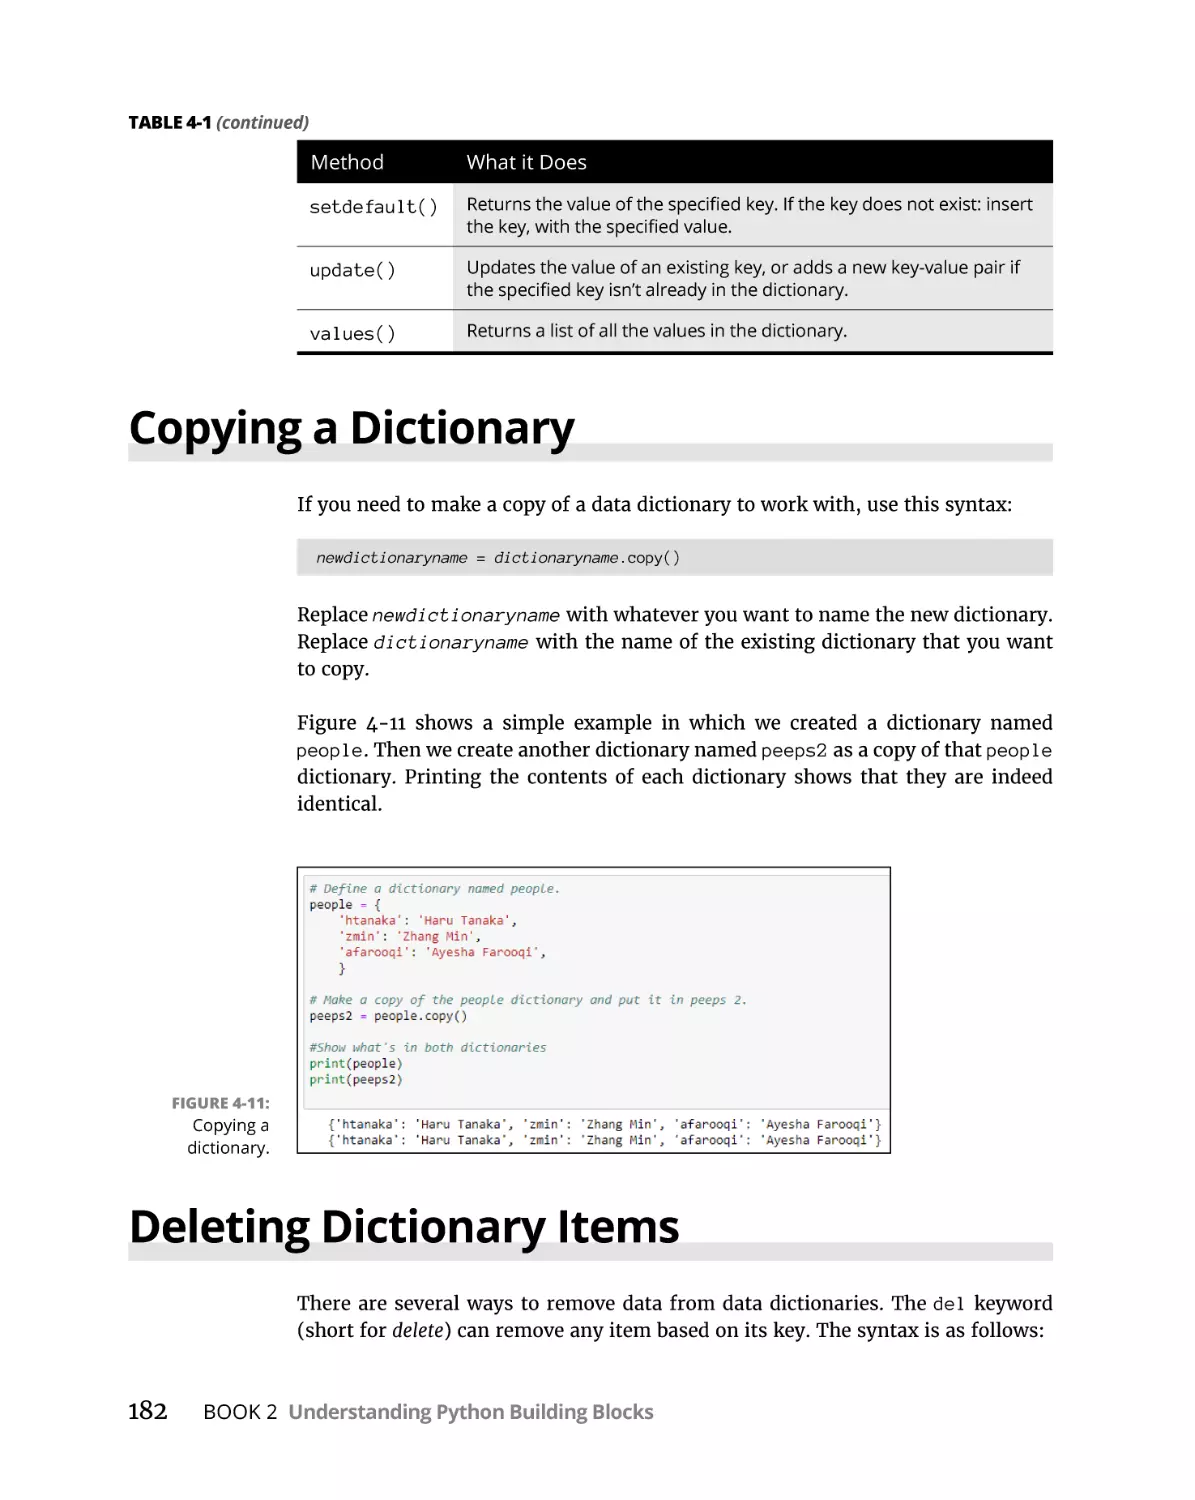 Copying a Dictionary
Deleting Dictionary Items